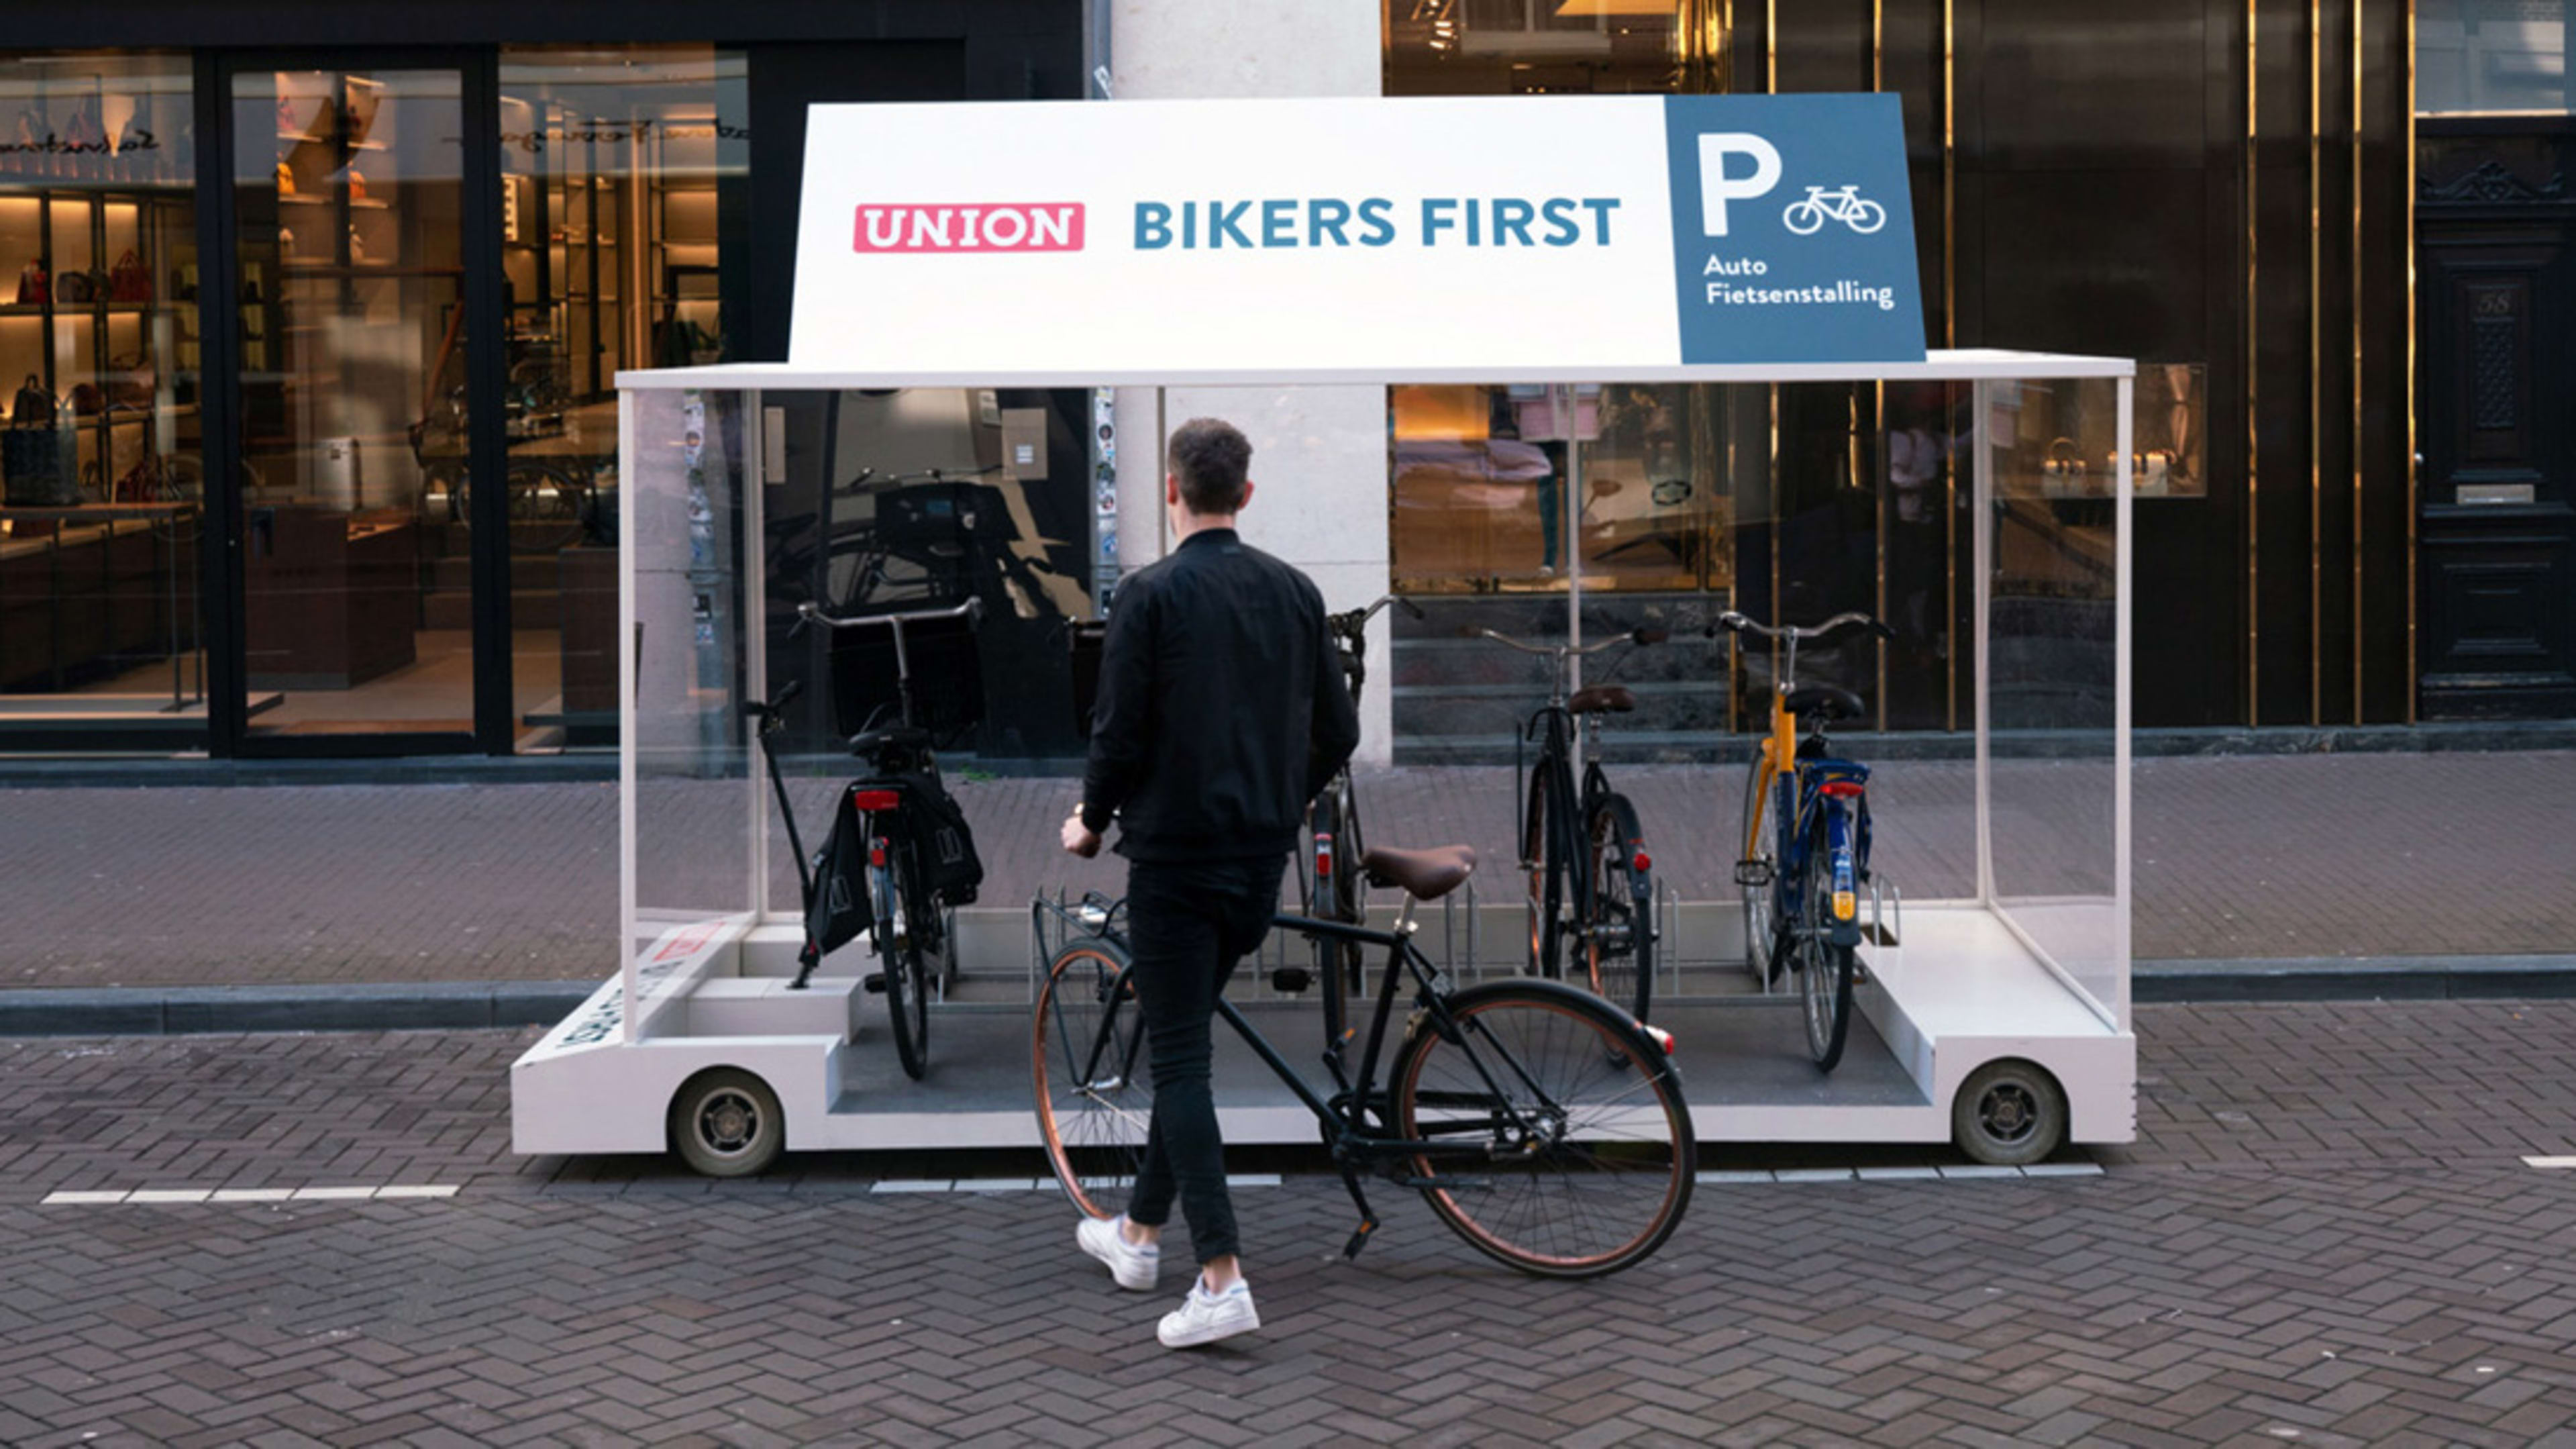 This pop-up bike rack is designed to take over a parking space